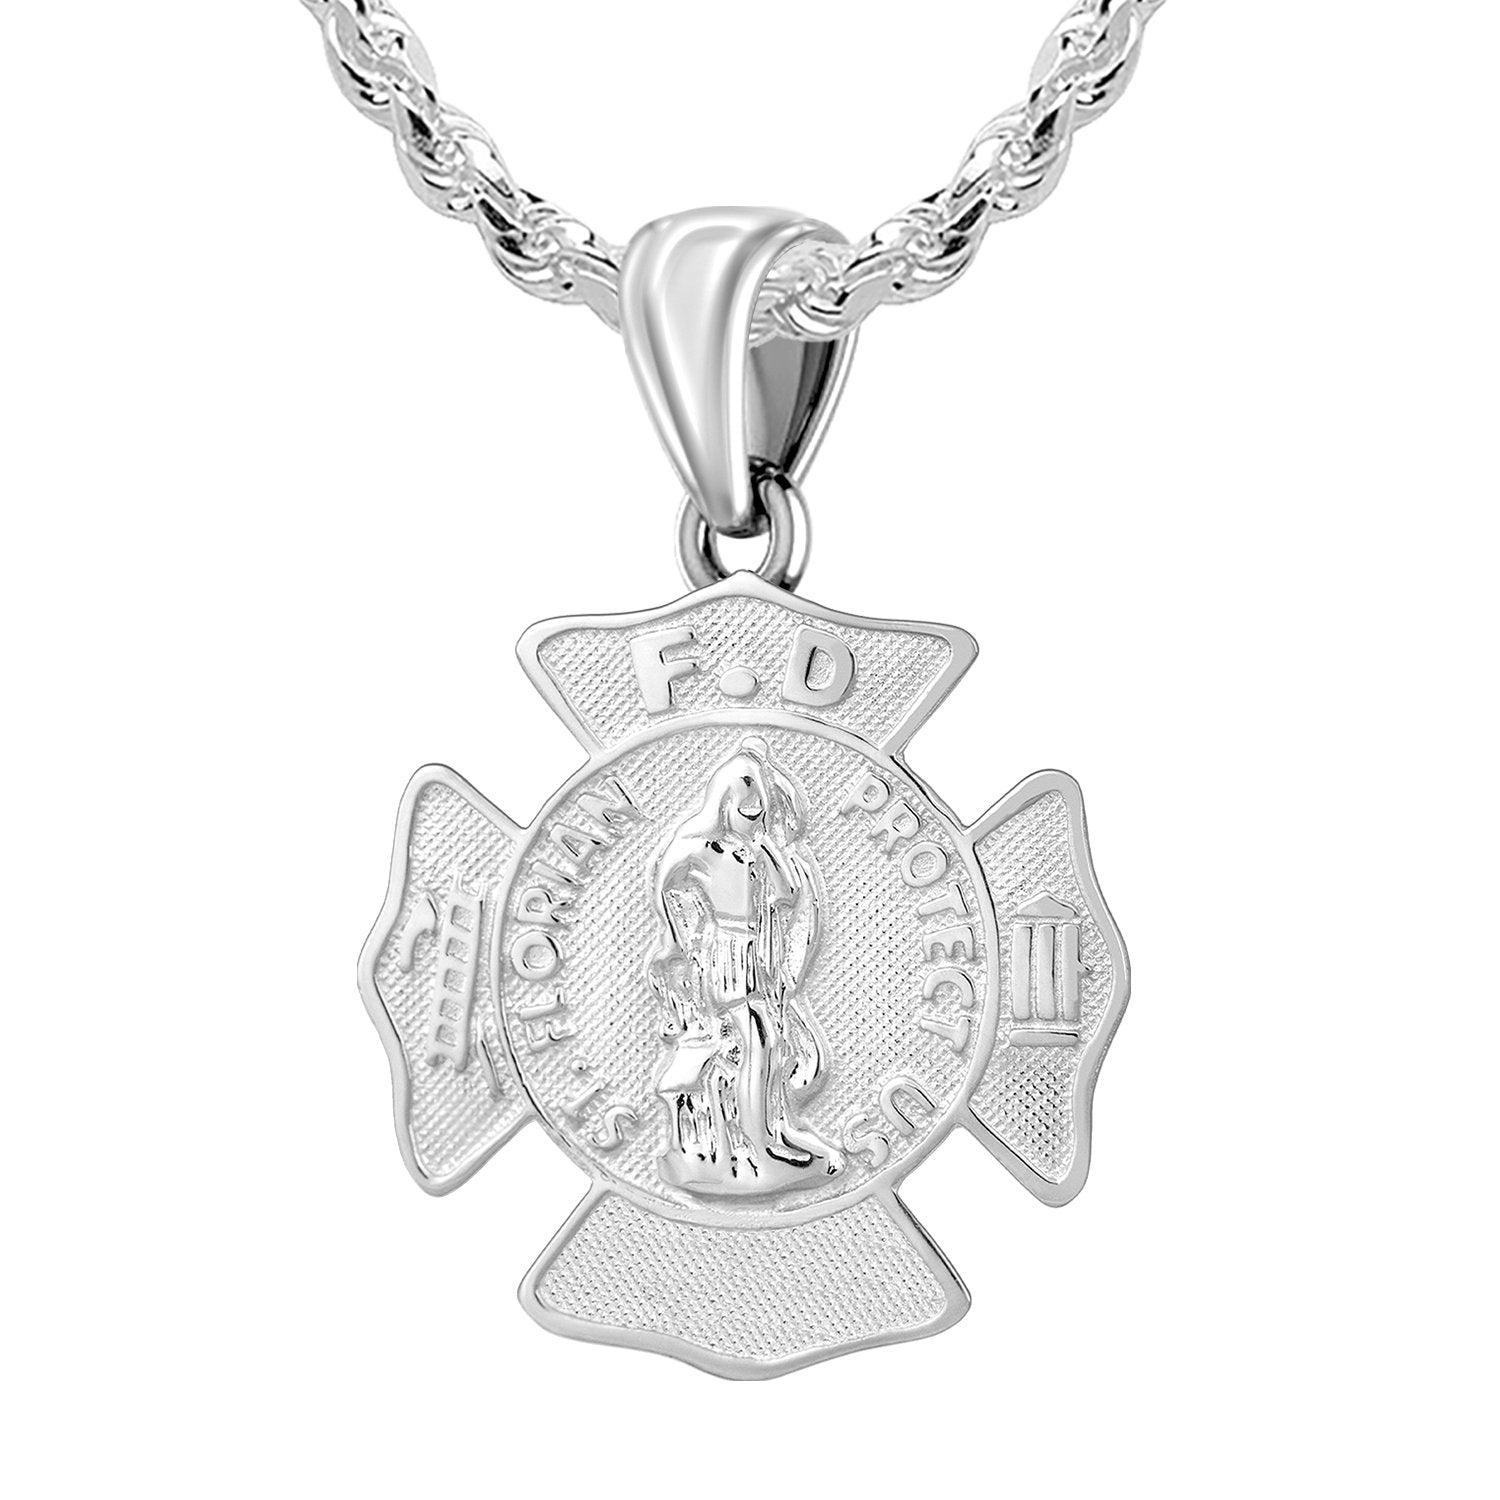 Firefighter Pendant In 925 Silver - 3mm Rope Chain